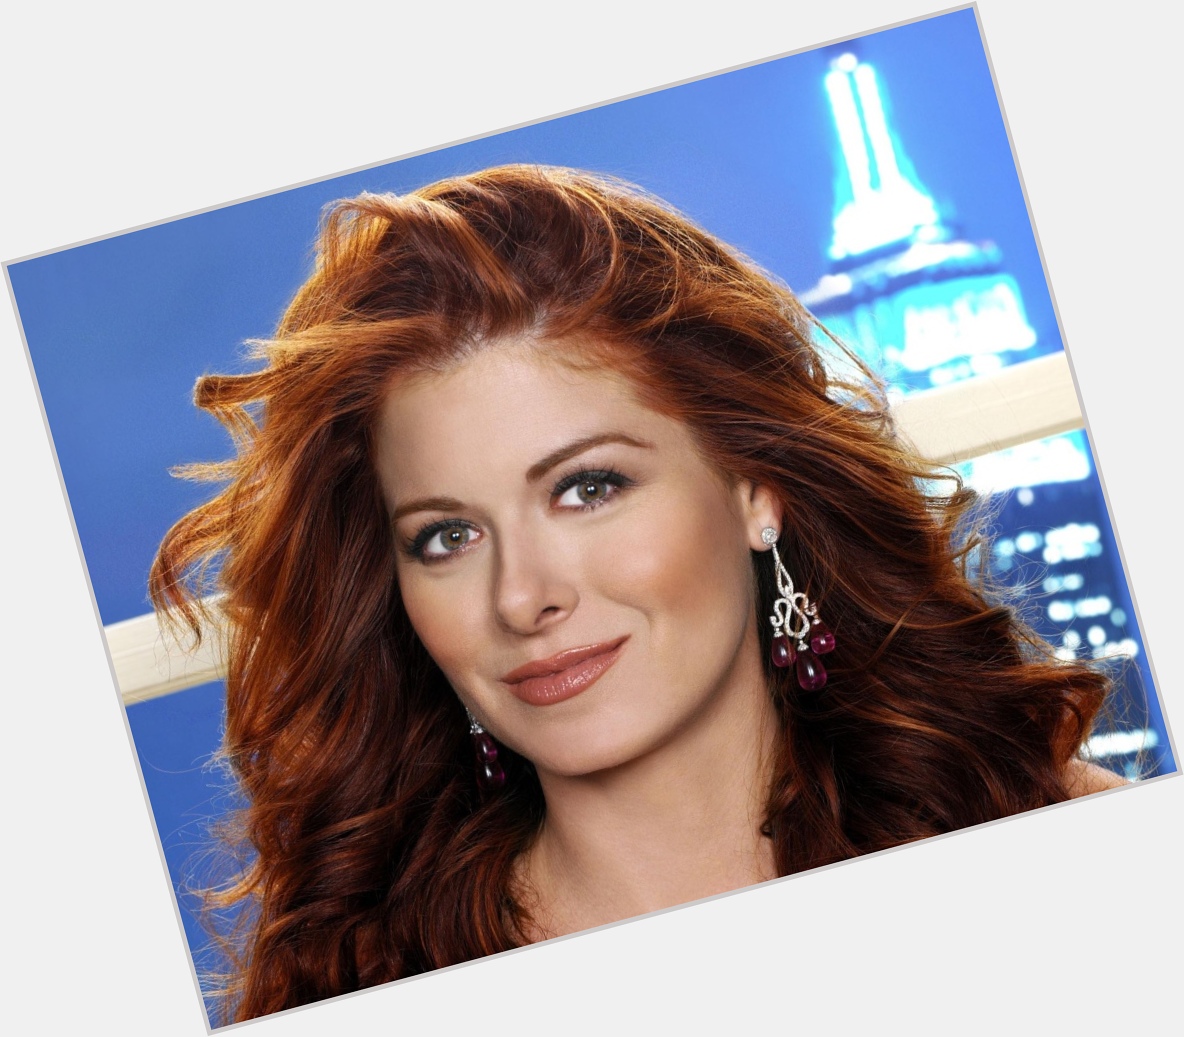 HAPPY BIRTHDAY DEBRA MESSING          I hope you are having a Wonderful August this month!       